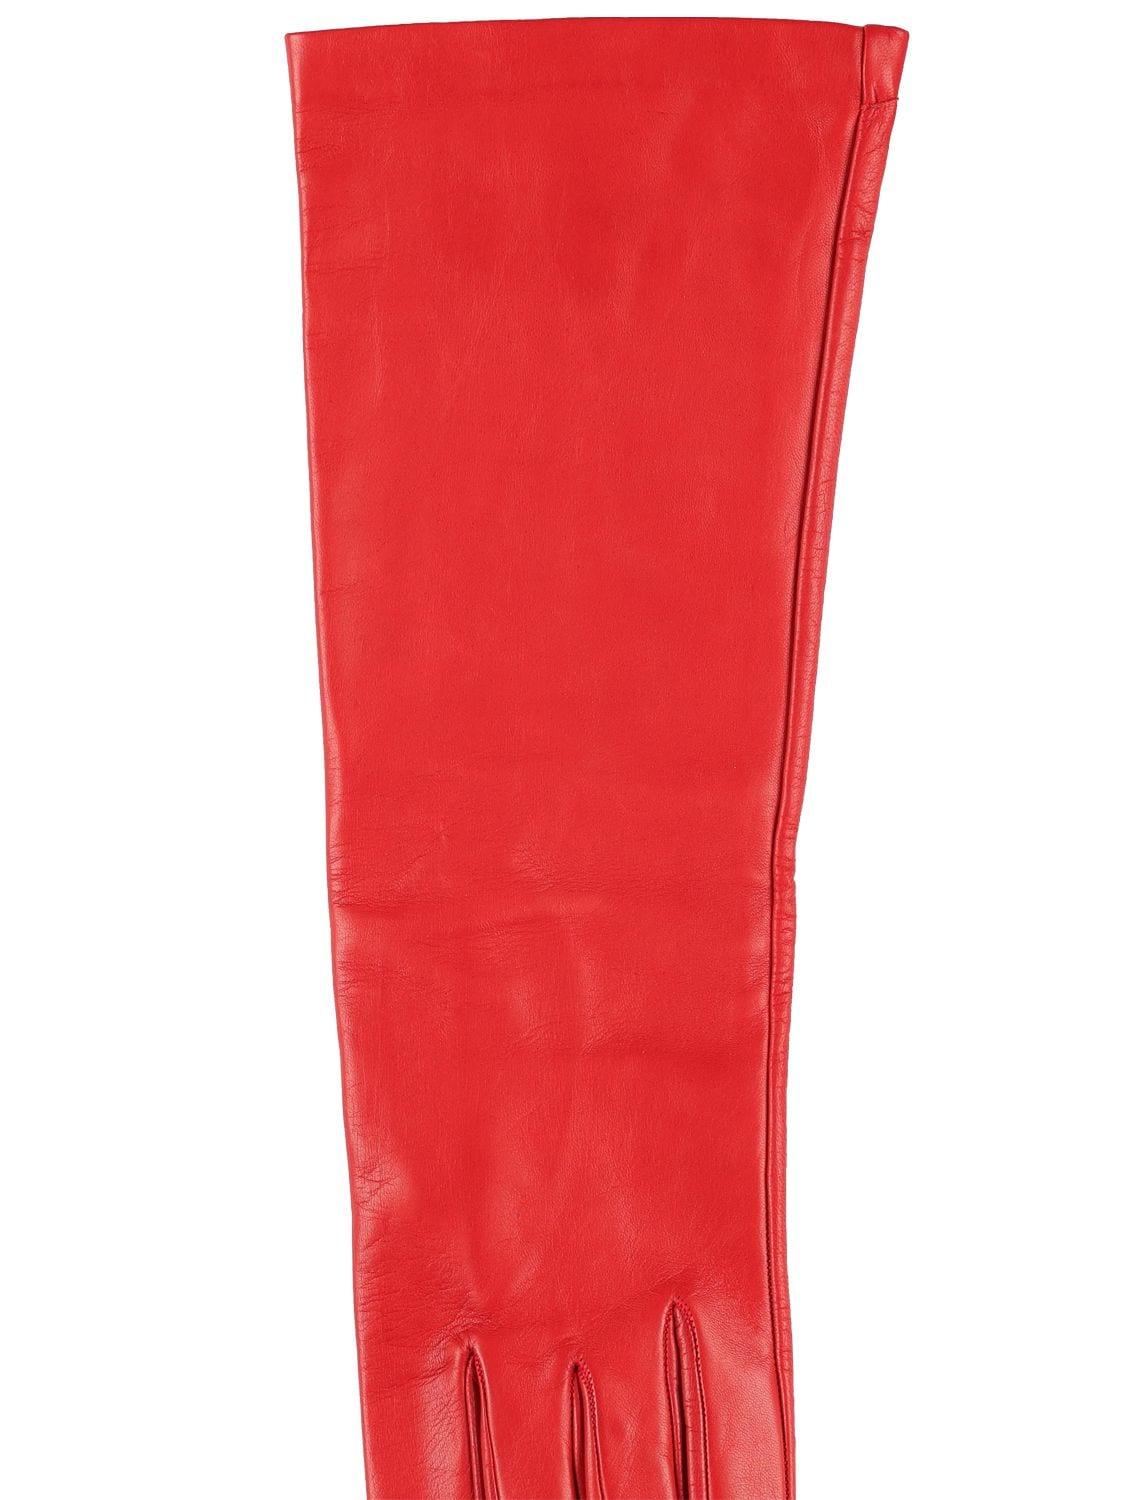 Mario Portolano Leather Gloves in Red | Lyst